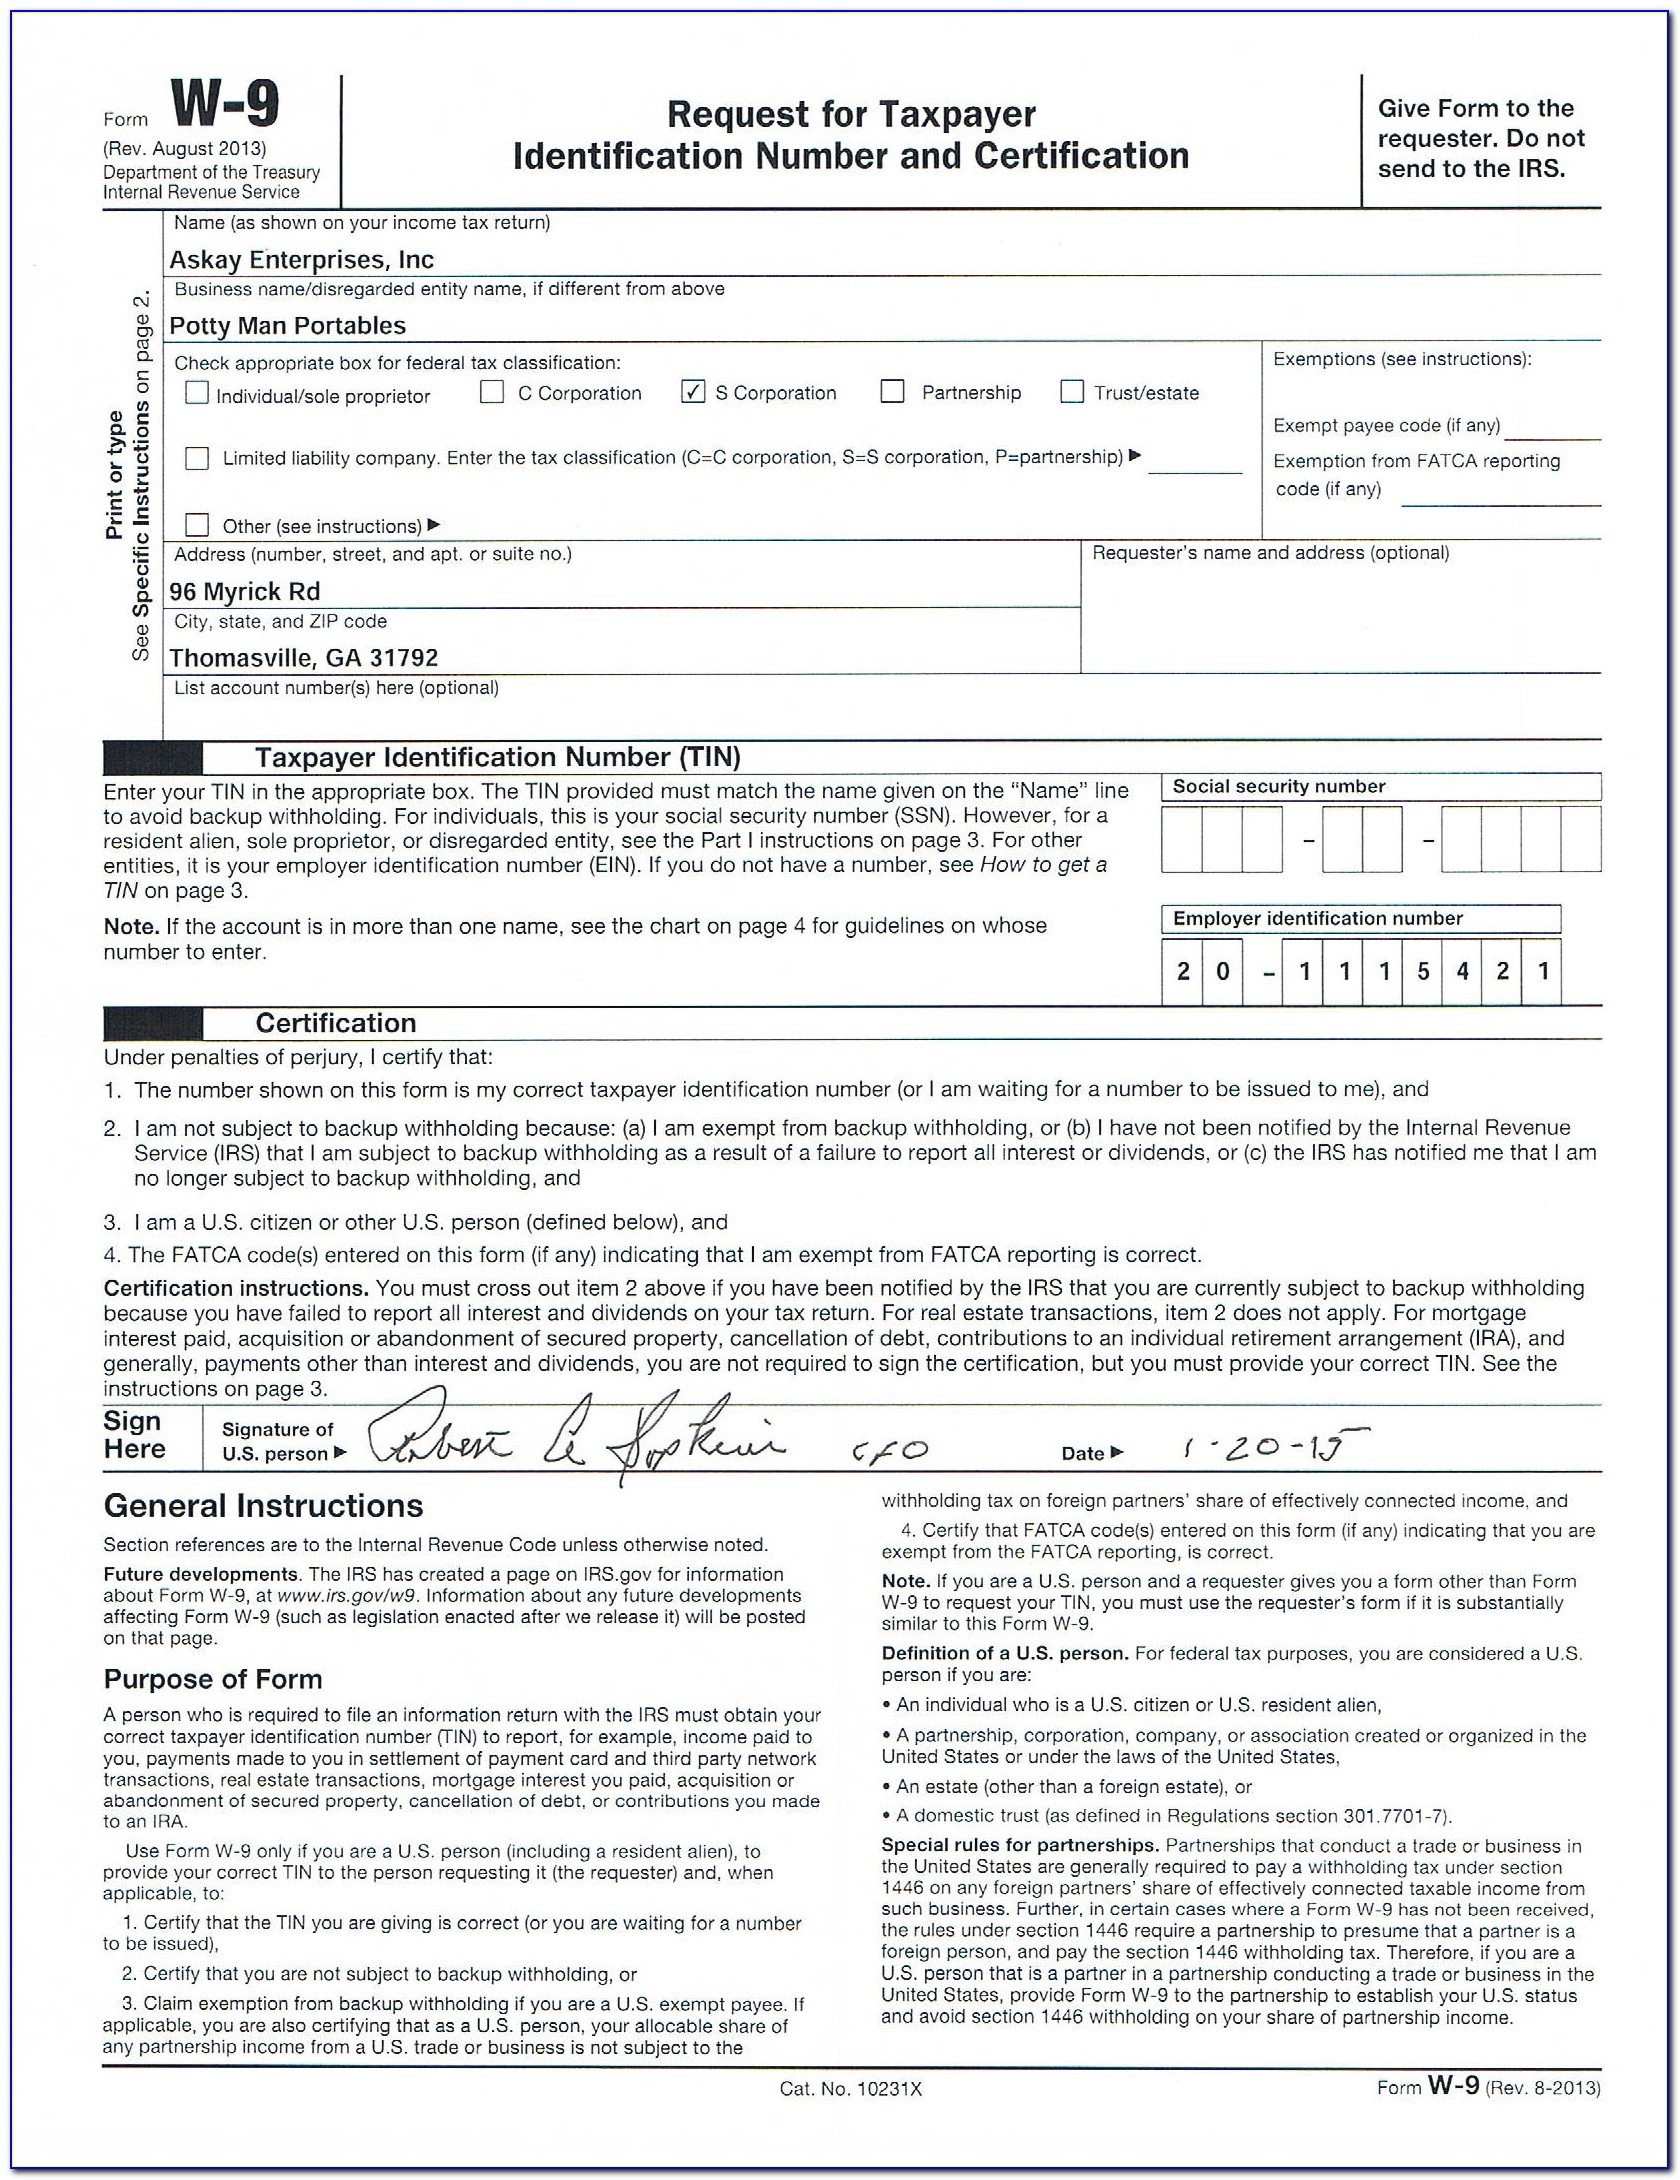 W9 Free Printable Form 2016 - Form : Resume Examples #x6Ped3Vlad - W9 Free Printable Form 2016